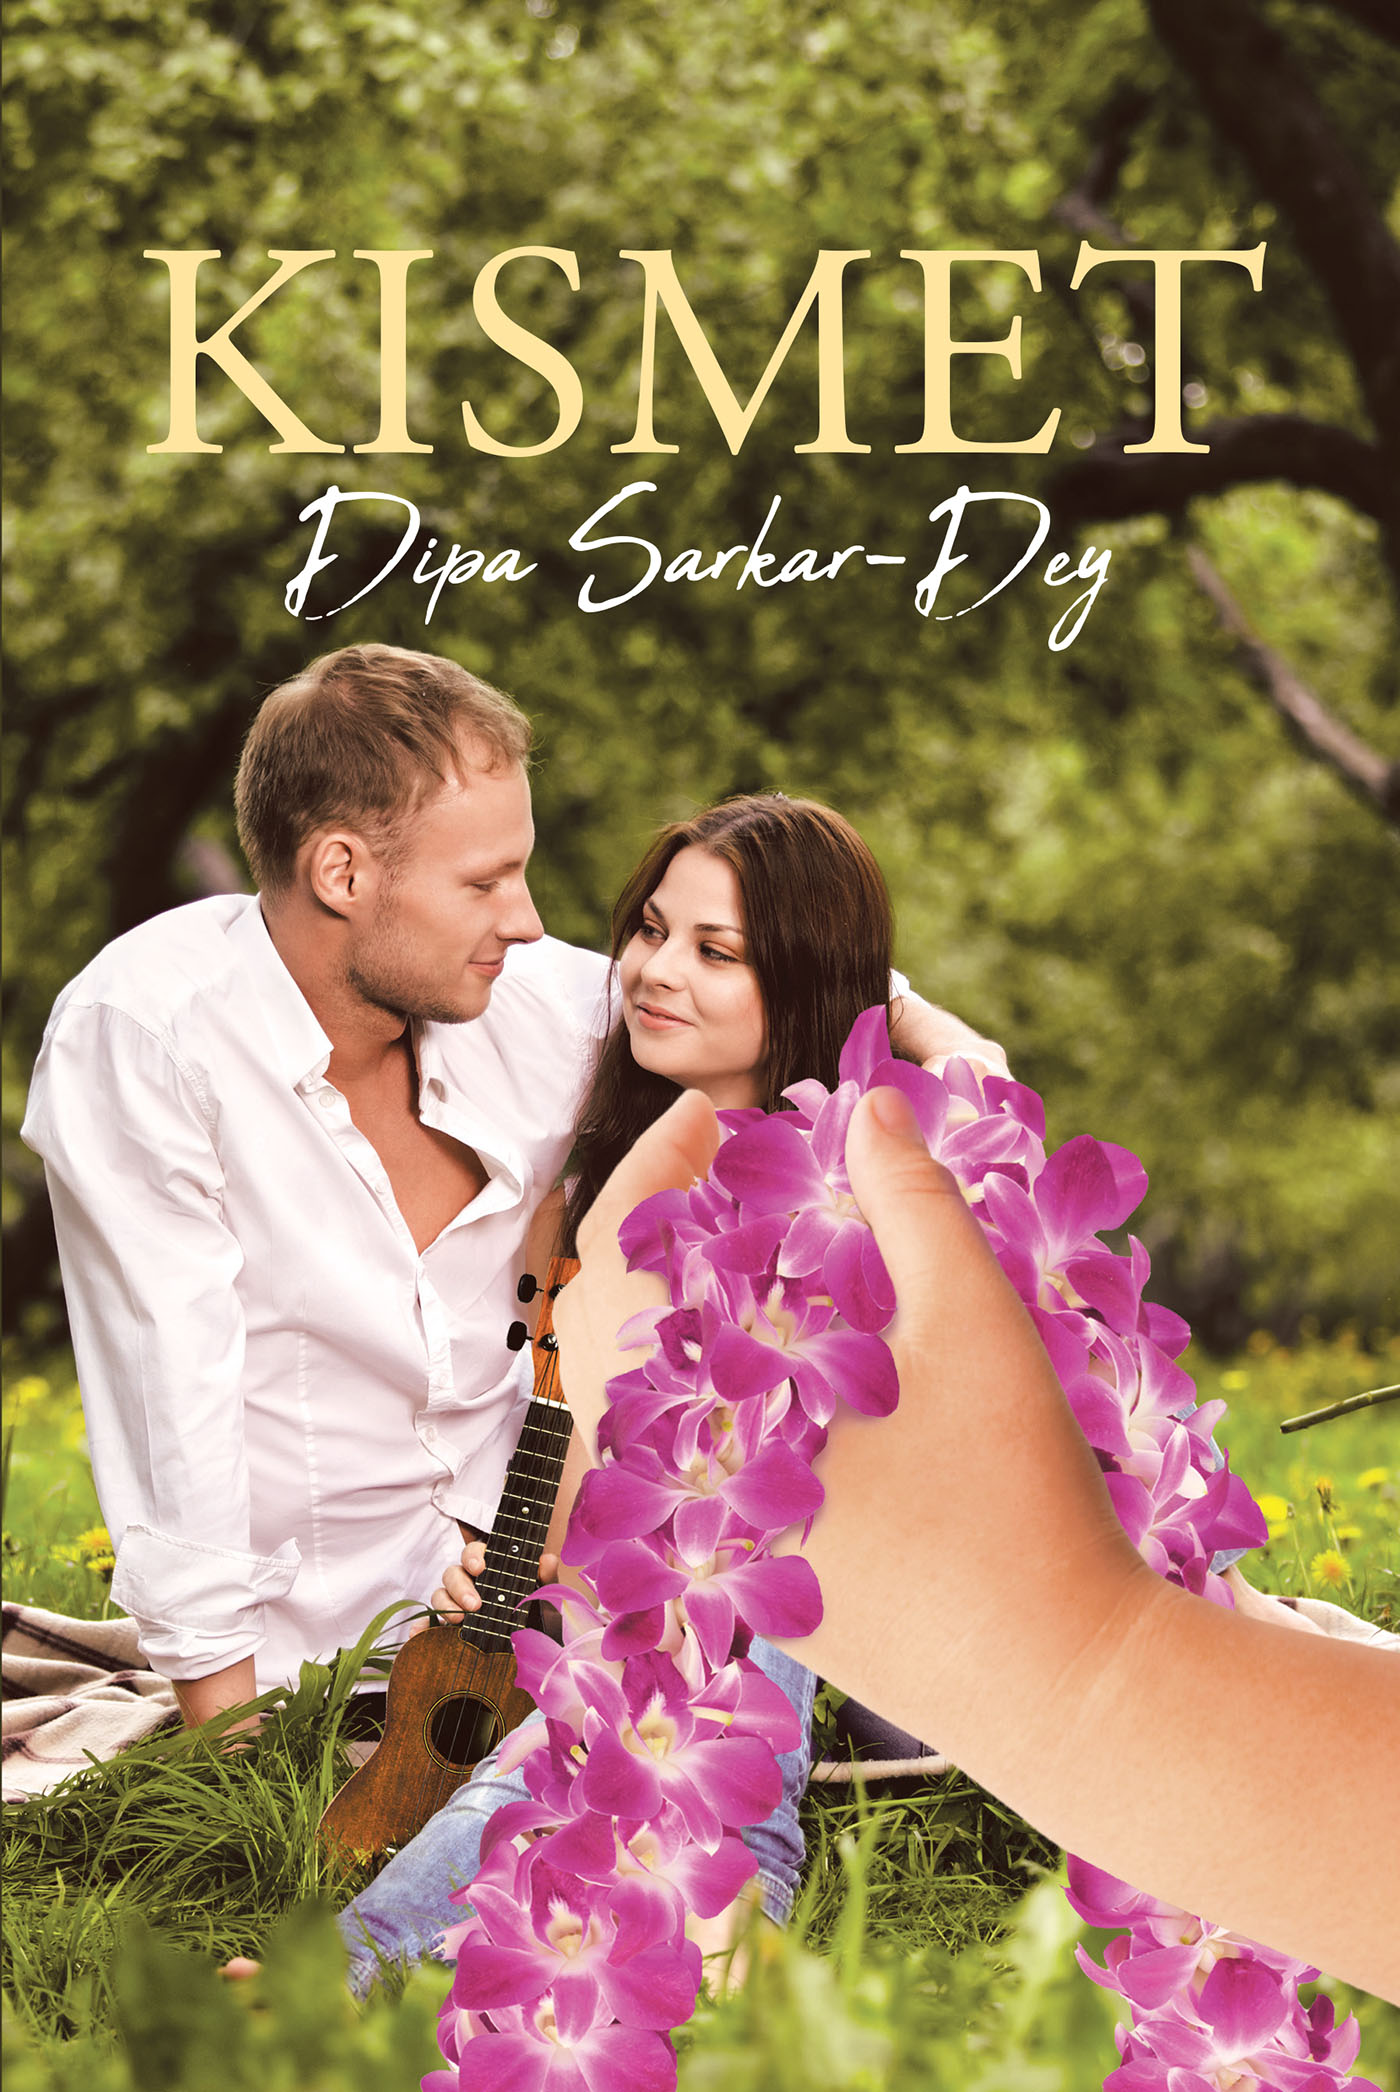 Author Dipa Sarkar-Dey’s New Book, "Kismet," is a Meaningful Collection of Powerful Poetry That Explore the Concept of Destiny